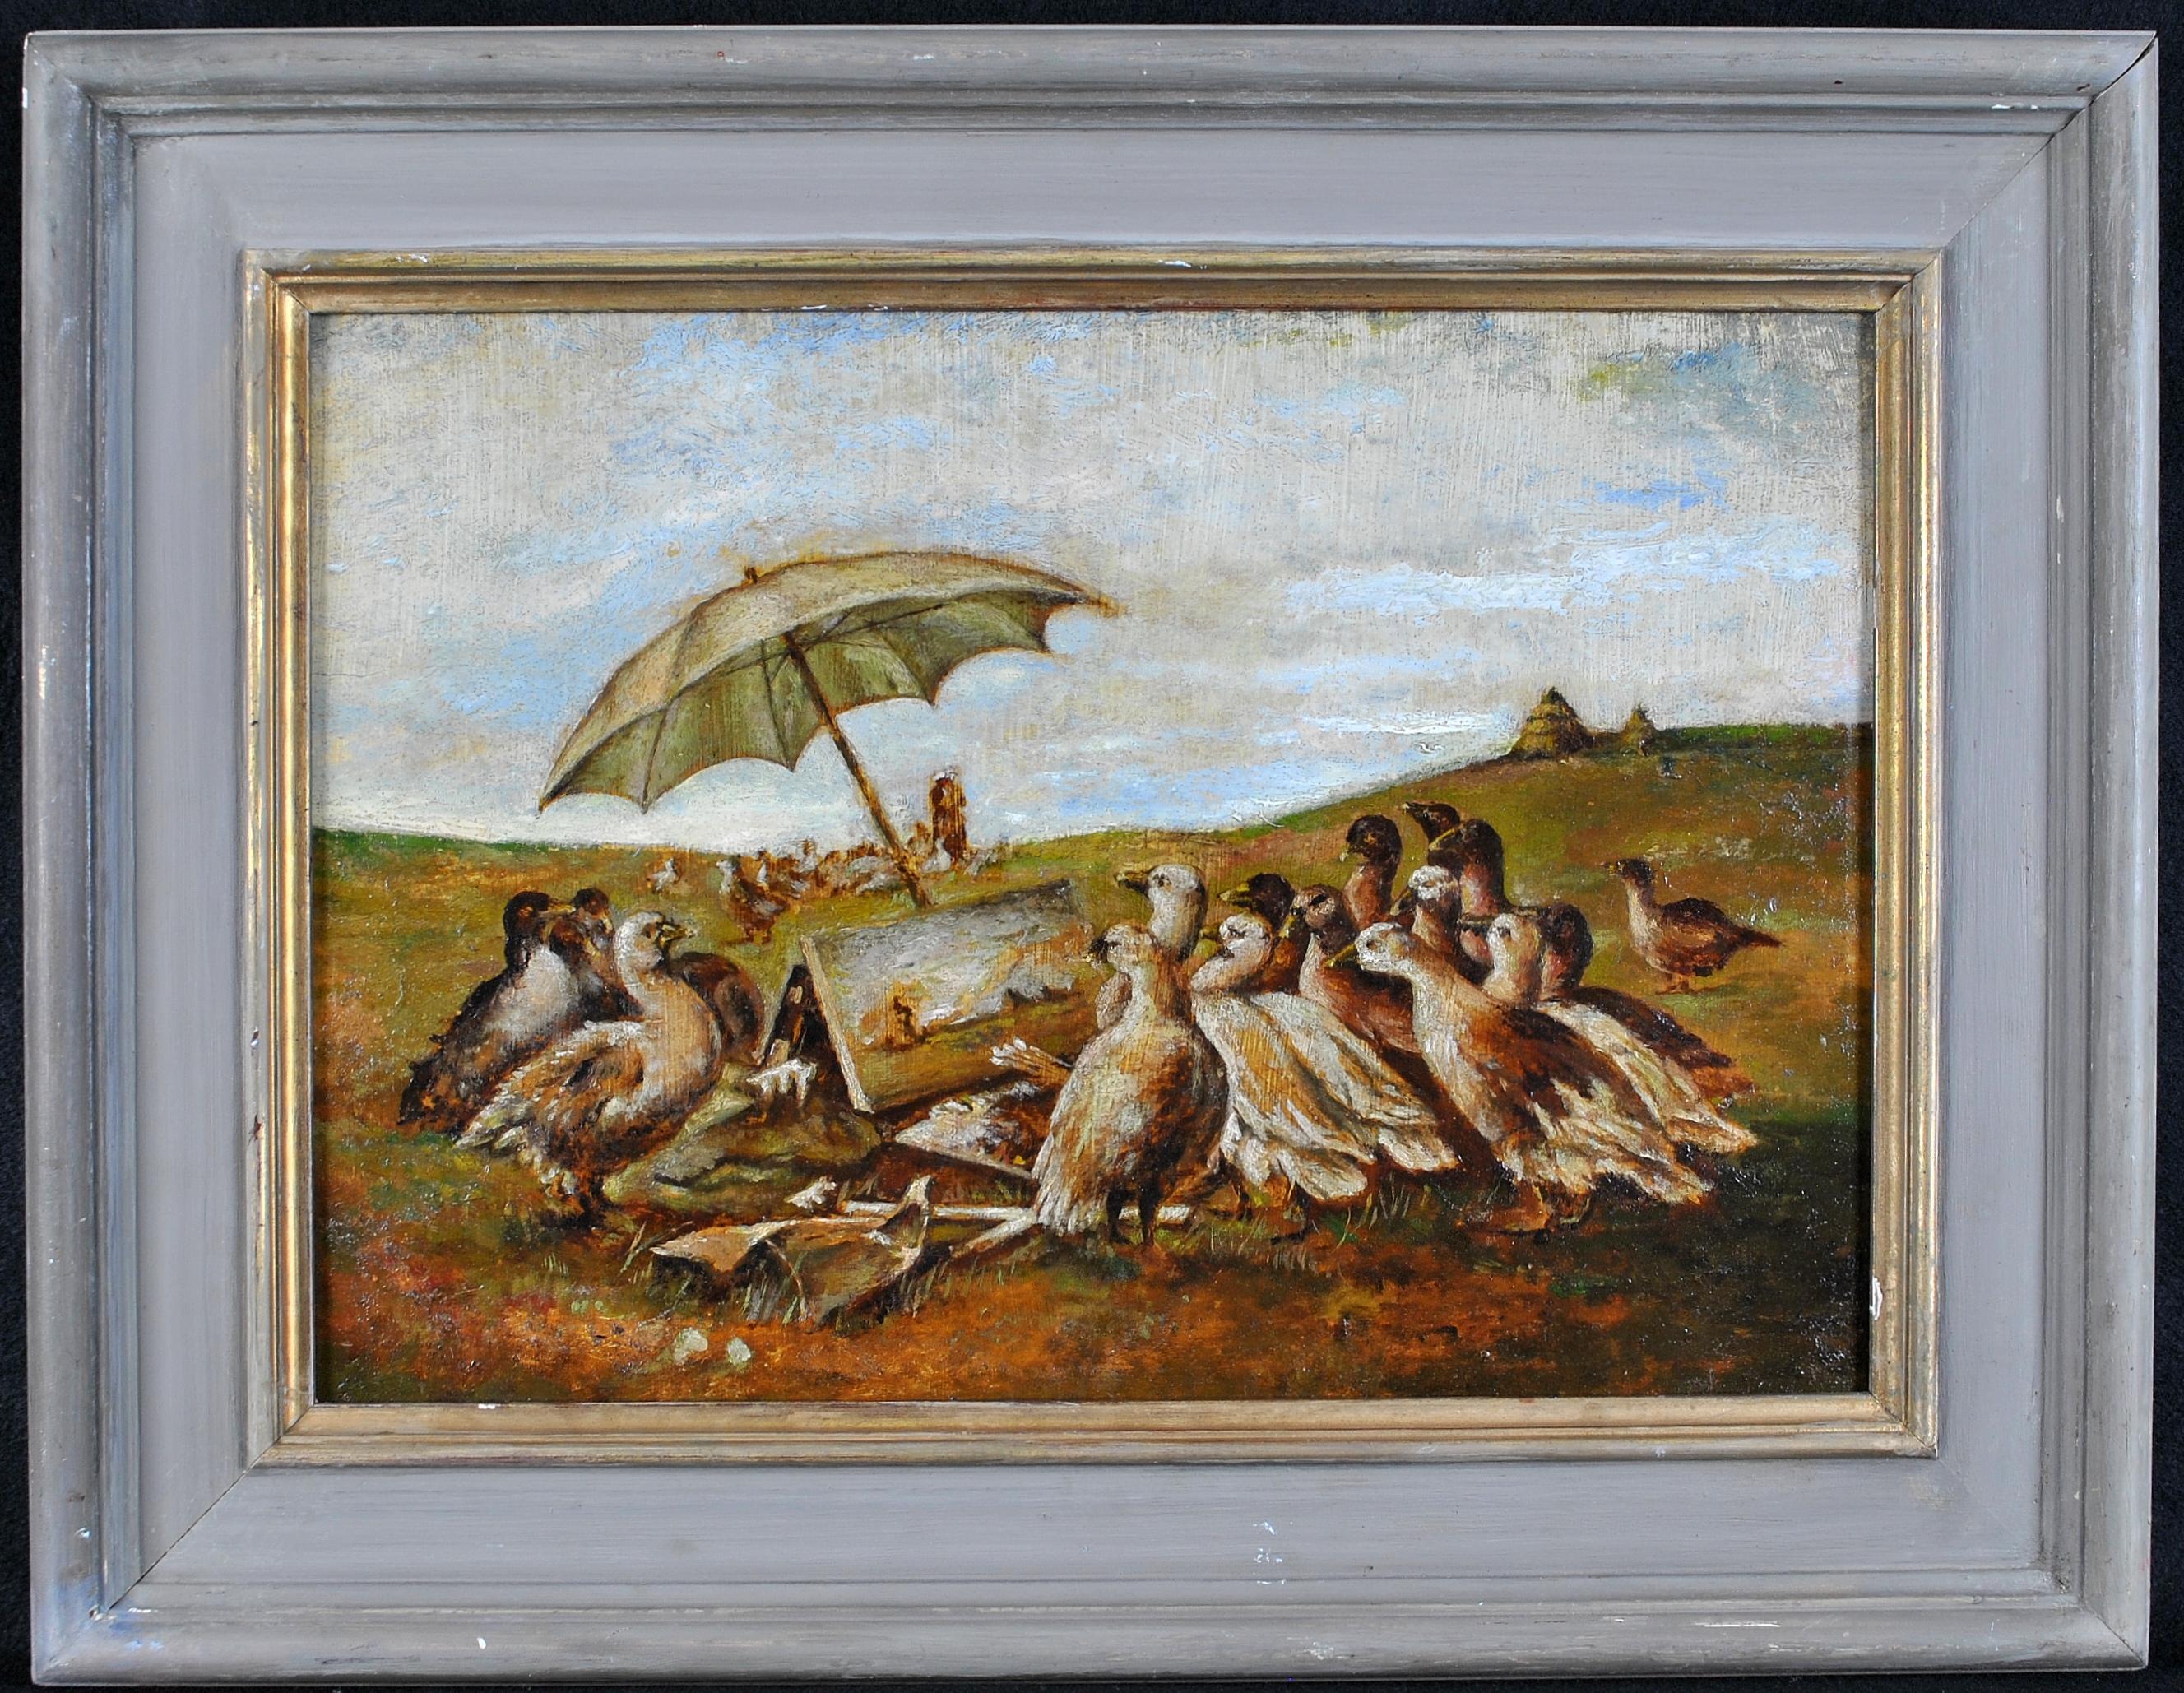 Early 20th Century French School Animal Painting - Geese Admiring a Painting - Early 20th Century French Antique Oil Painting